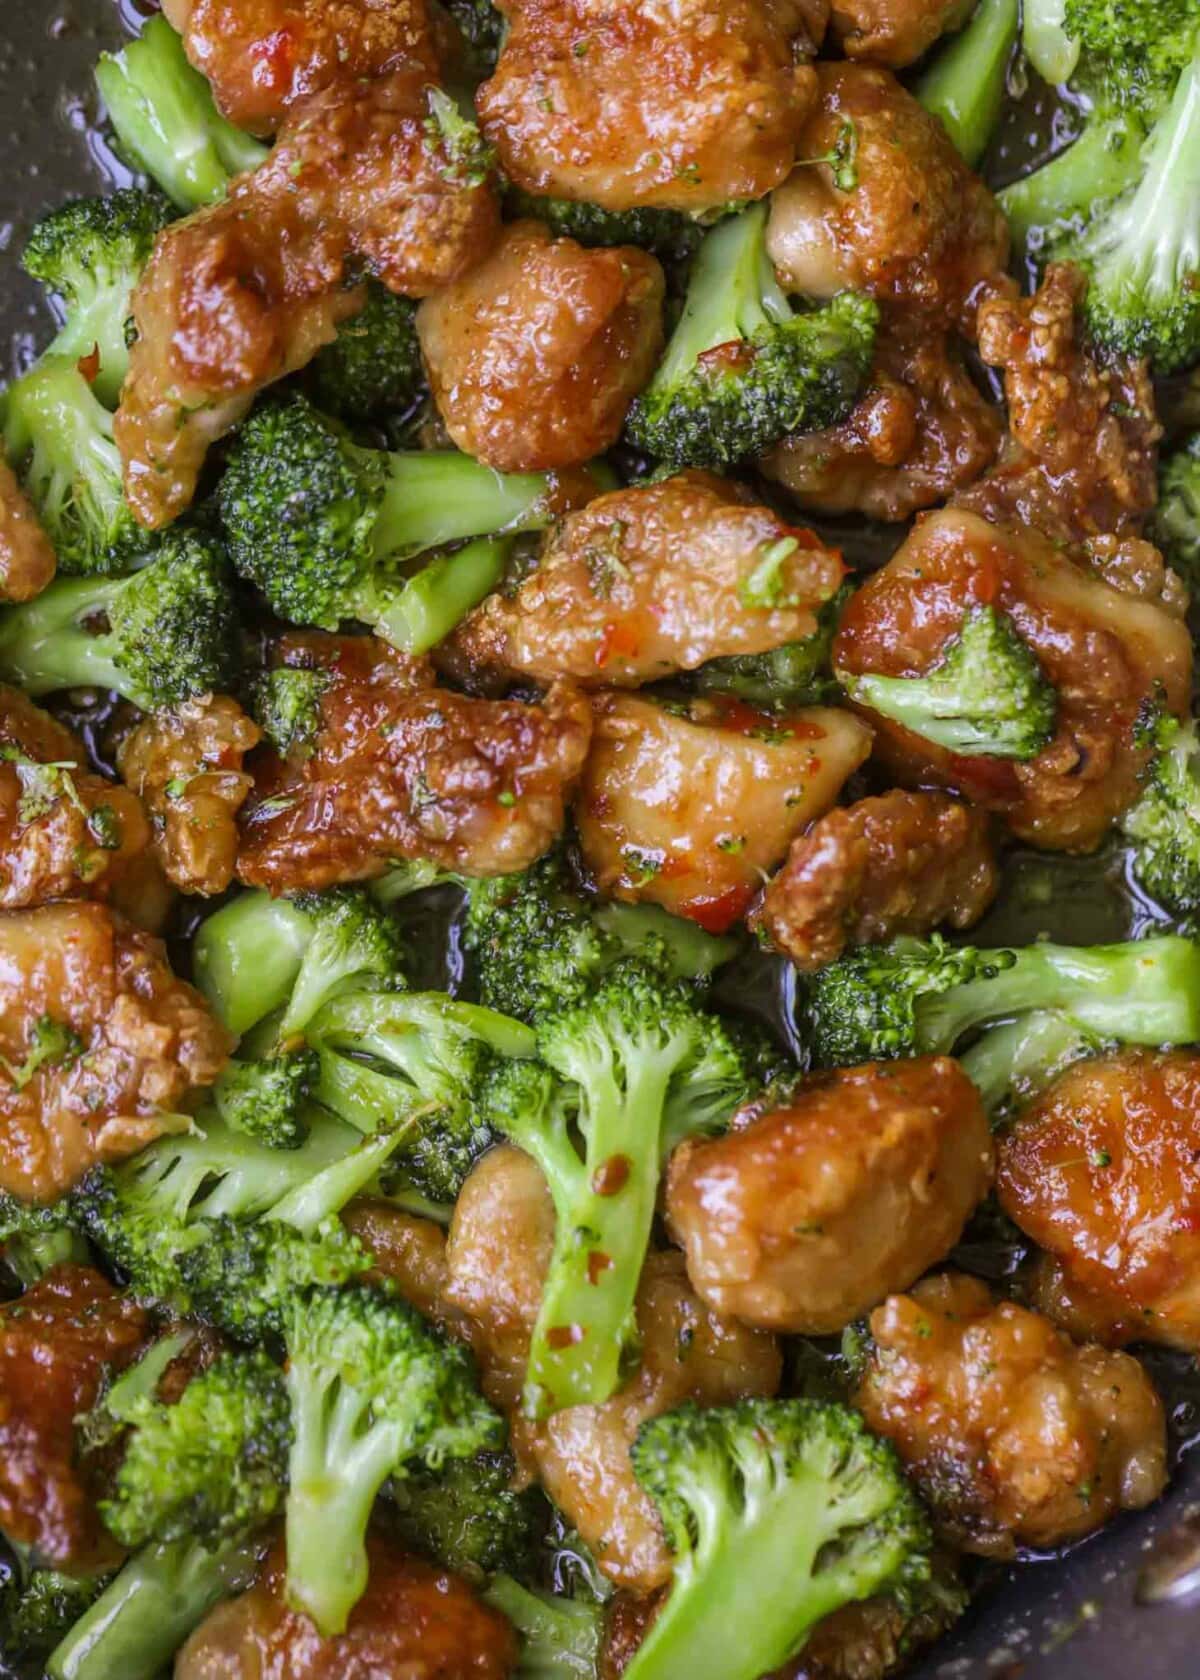 Close up image of General Tso's chicken recipe.